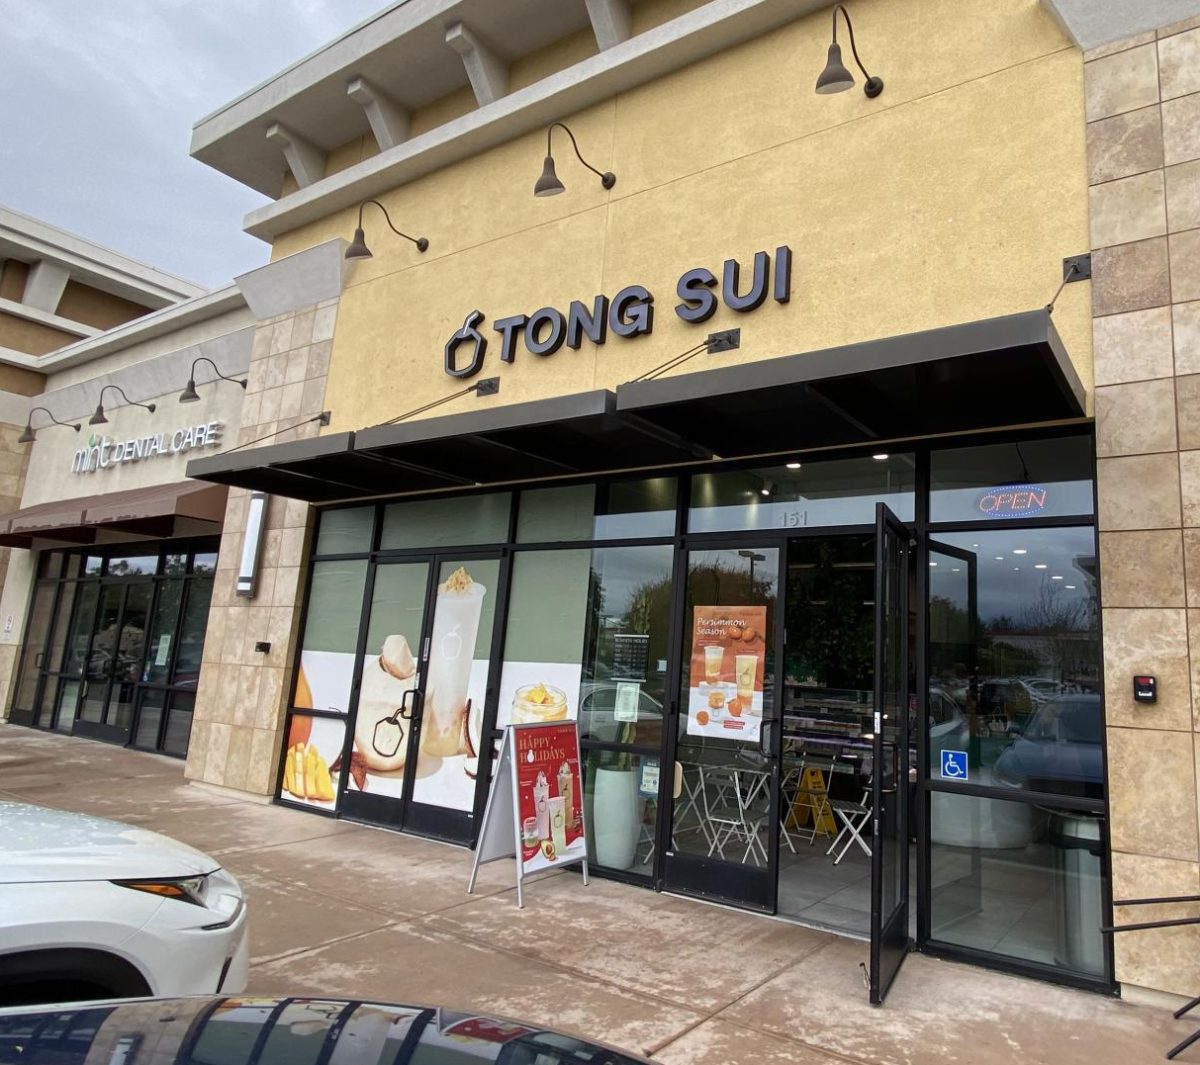 The facade of Tong Suis Sunnyvale location.